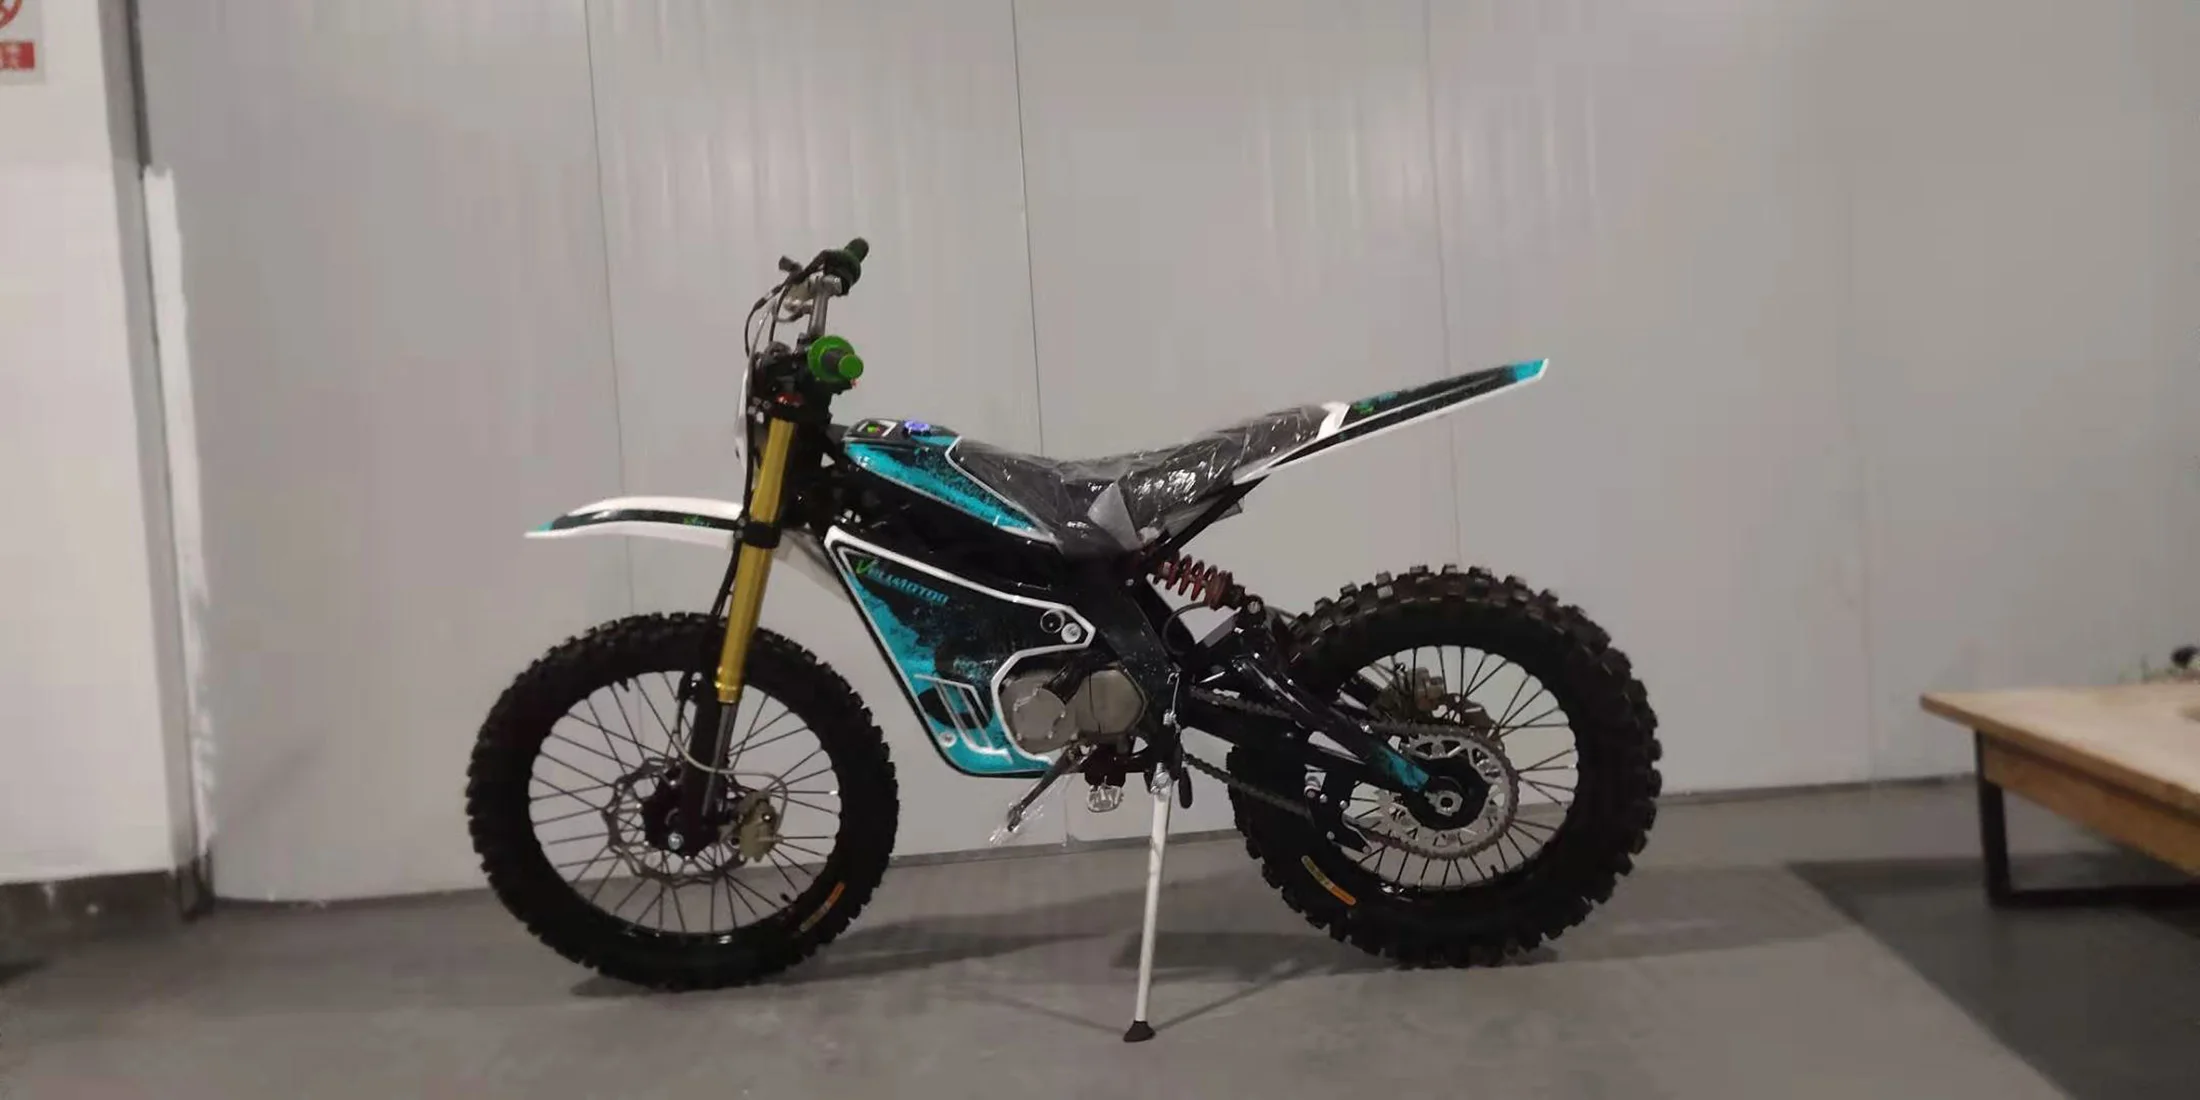 New Light  Dirt Bike Electric Motorcycle 2022 NEW dirtbike 12000W Black Youth Adult Electric Pit Mountain Bikes Dirt Motocross